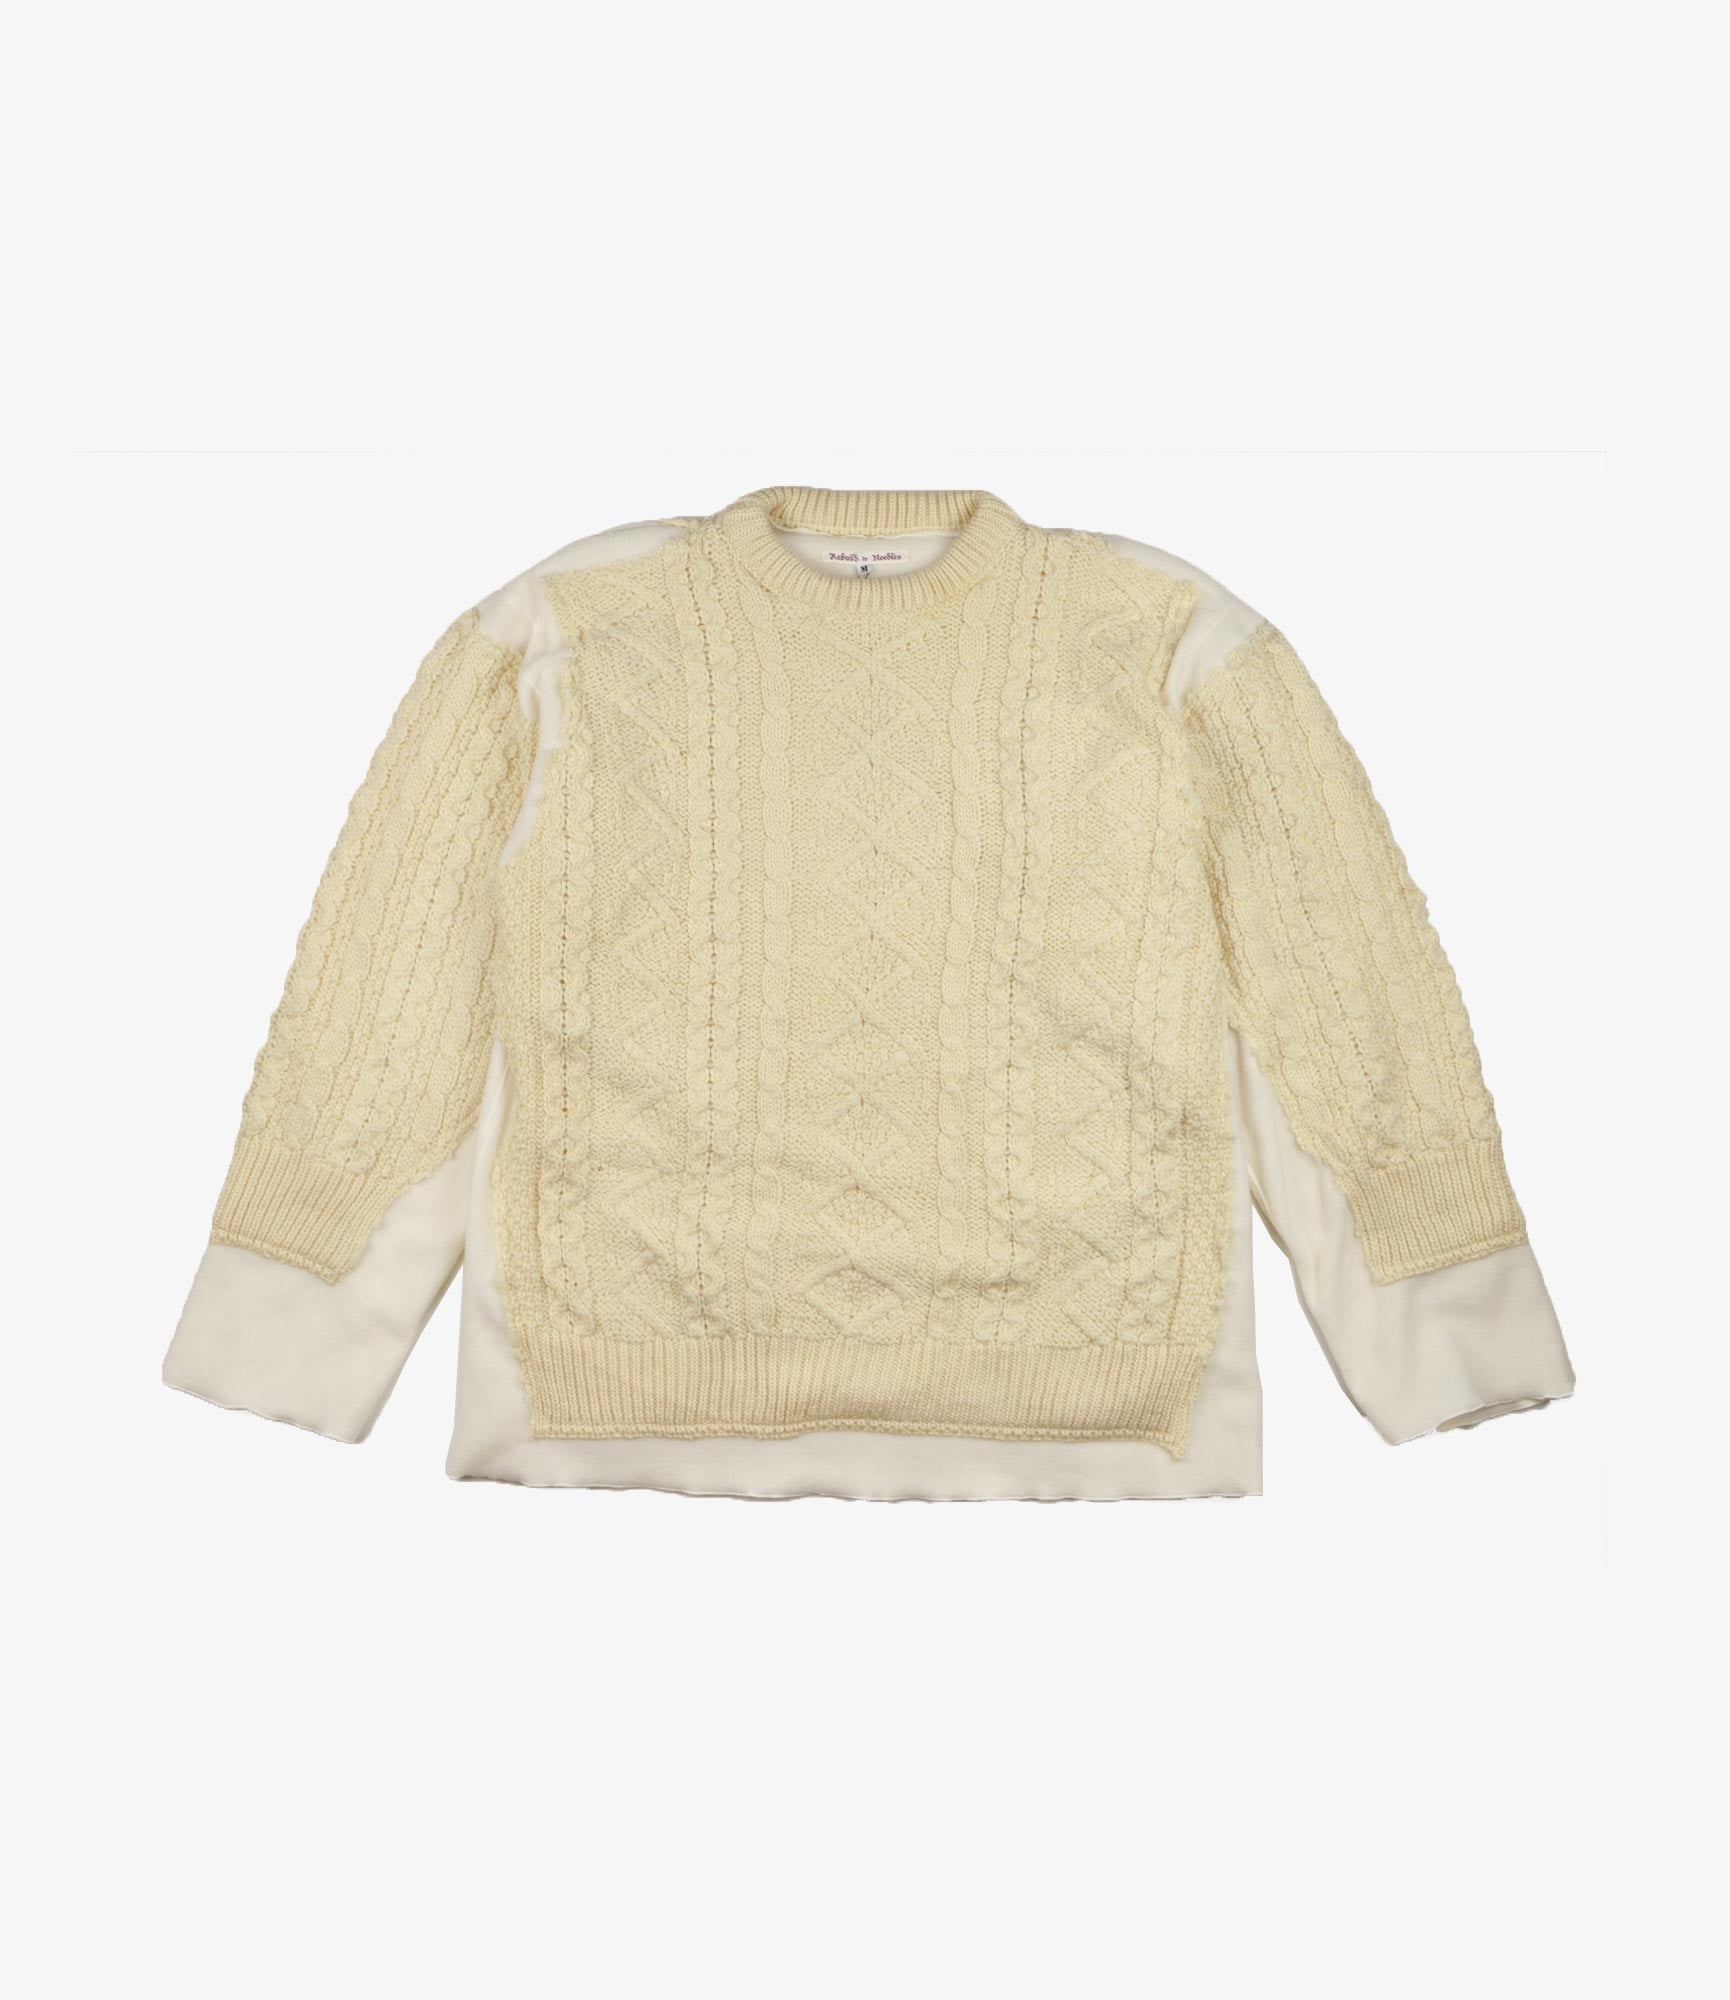 Rebuild by Needles Fisherman Sweater - Off White